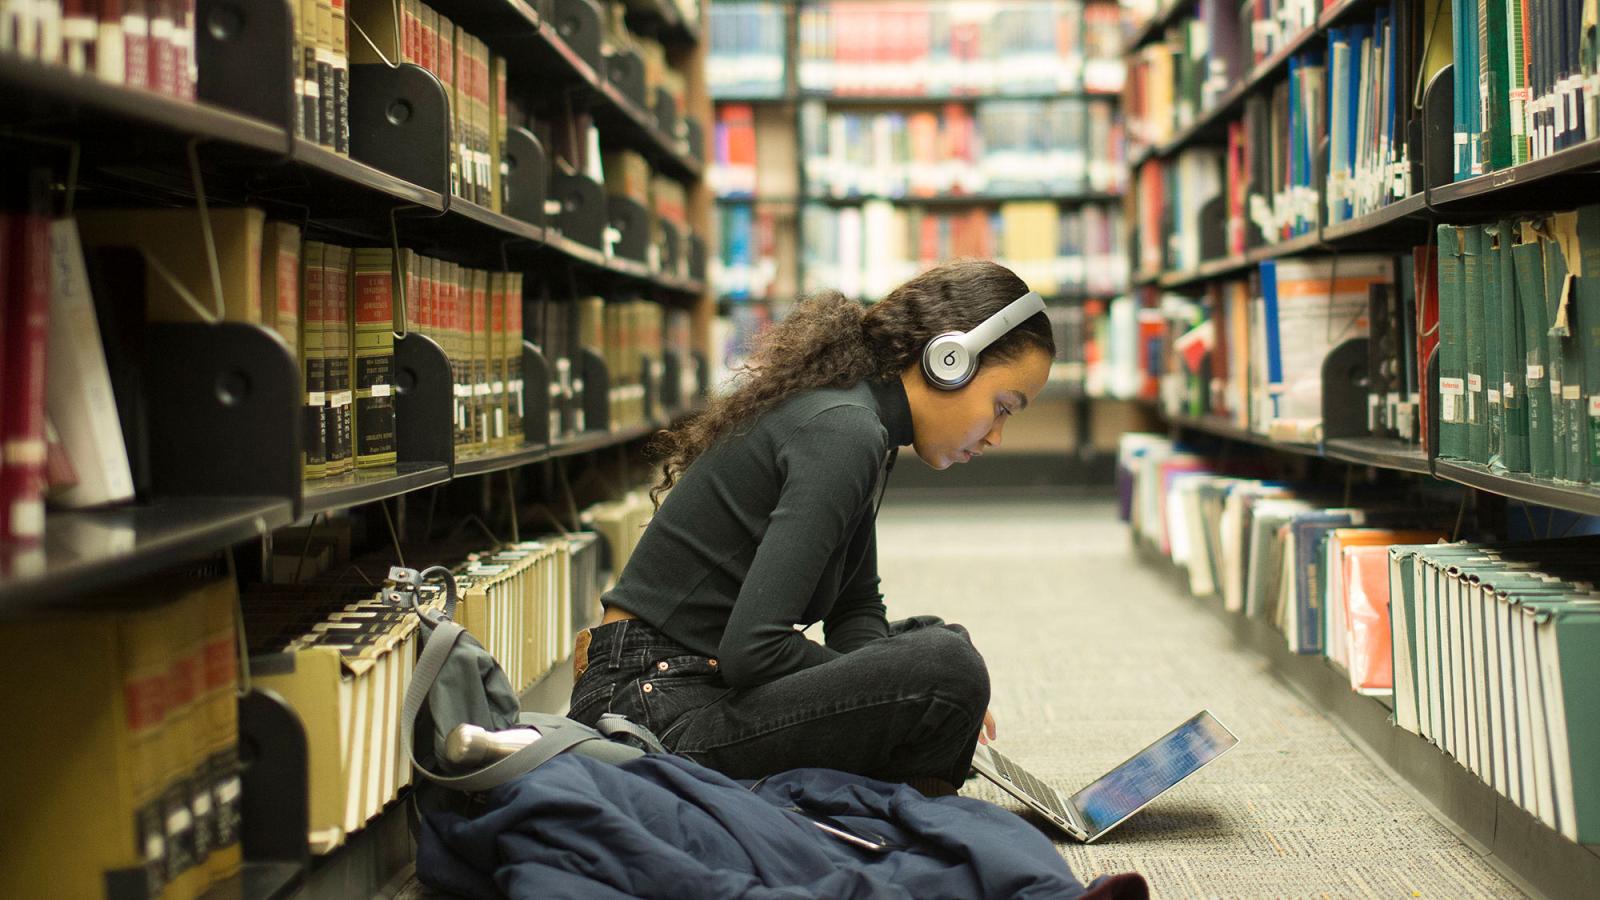 Student sitting on the floor of the library studying.